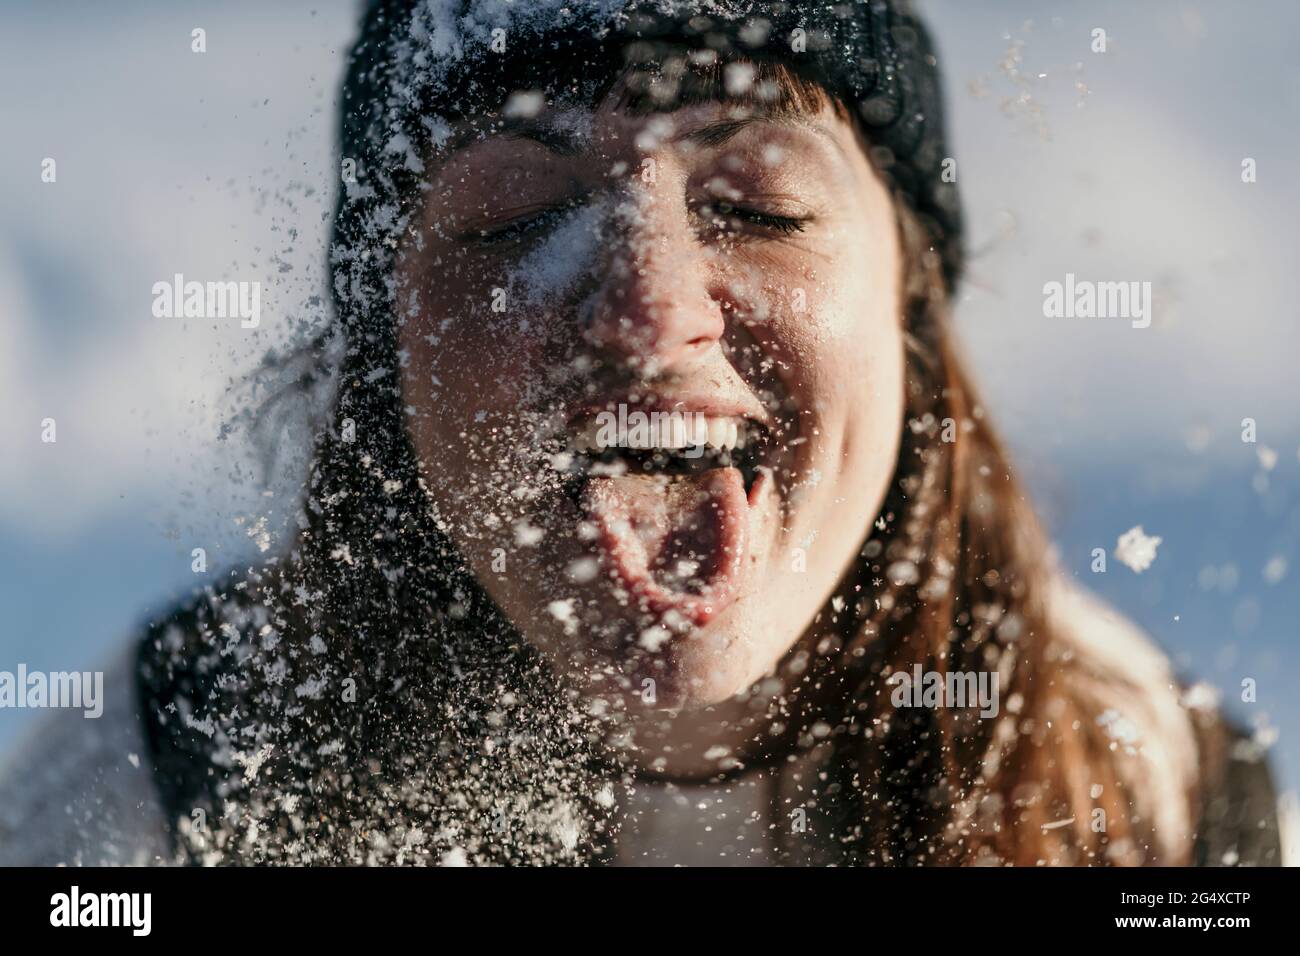 Mid adult woman sticking out tongue while playing during snowing Stock Photo